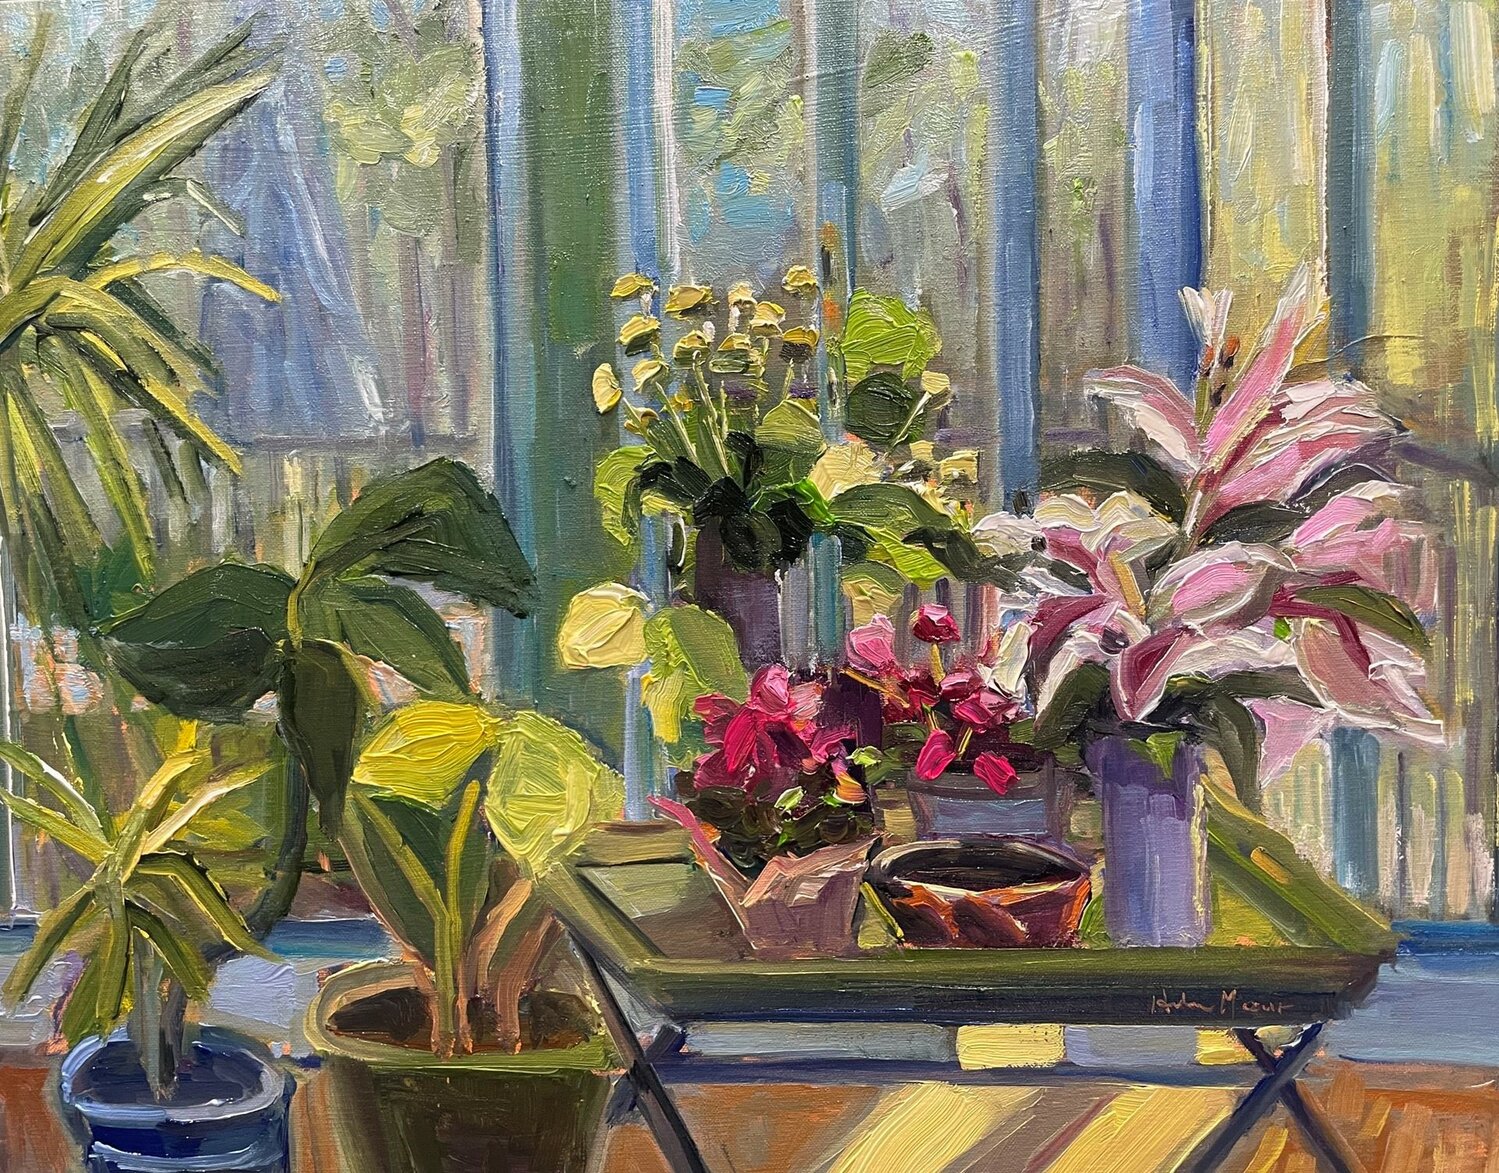 Winner of the 2nd Place award of $500 is “Plants in the Sun,” an oil painting by Helene Mazur.